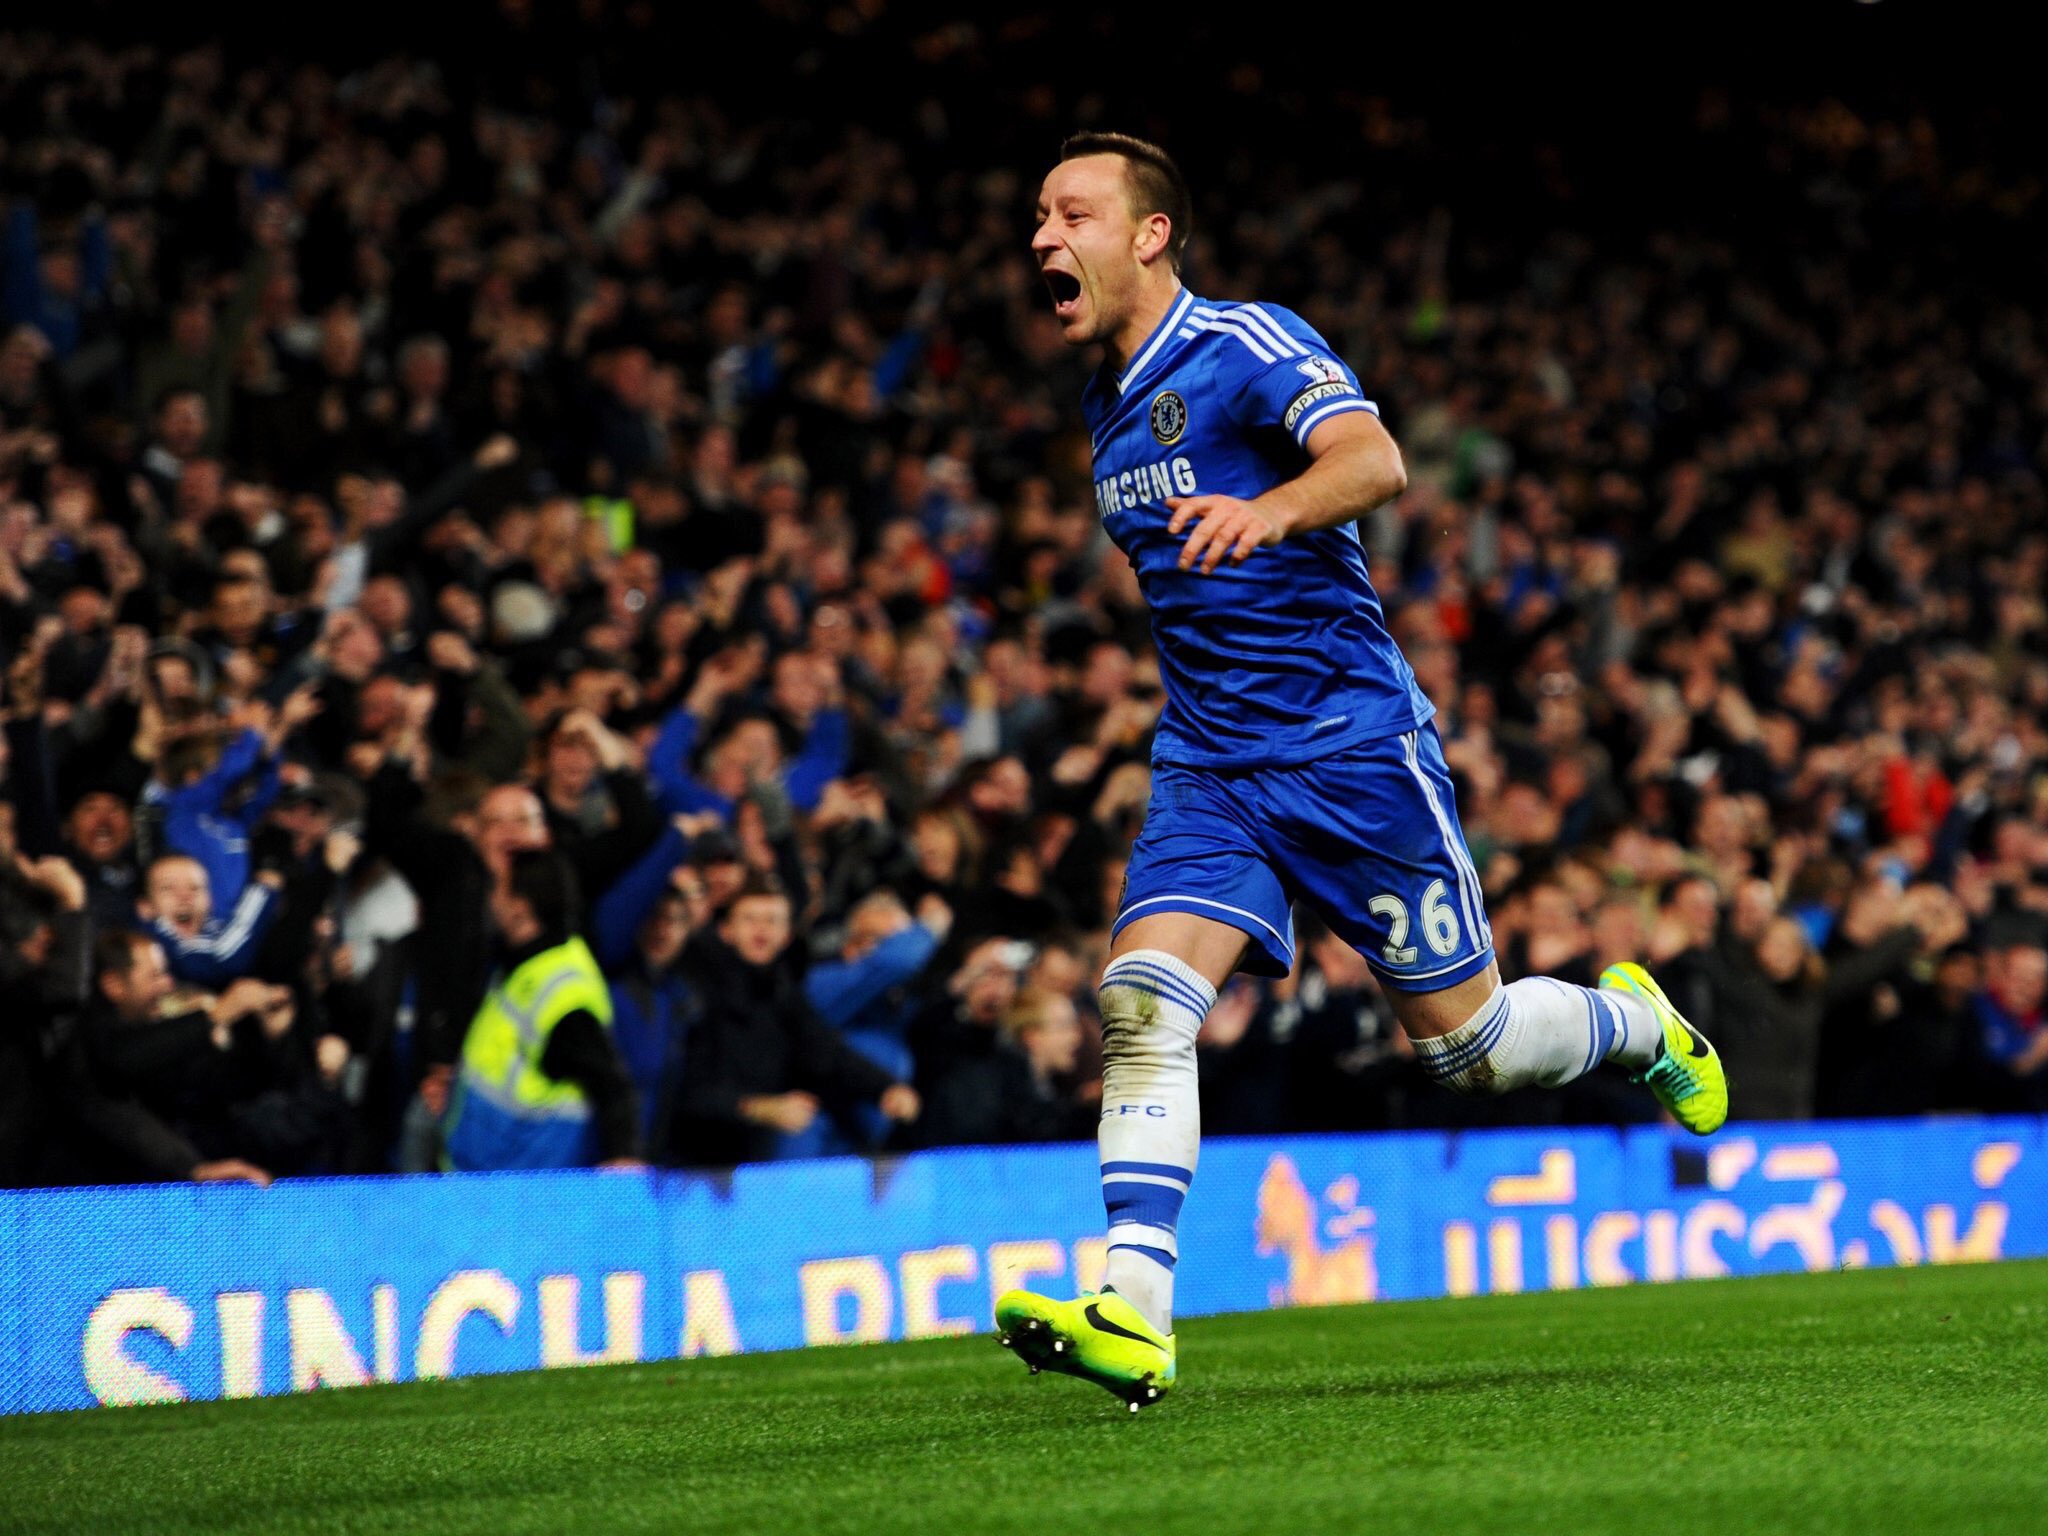 Happy Birthday to our Captain, Leader, Legend John Terry! 